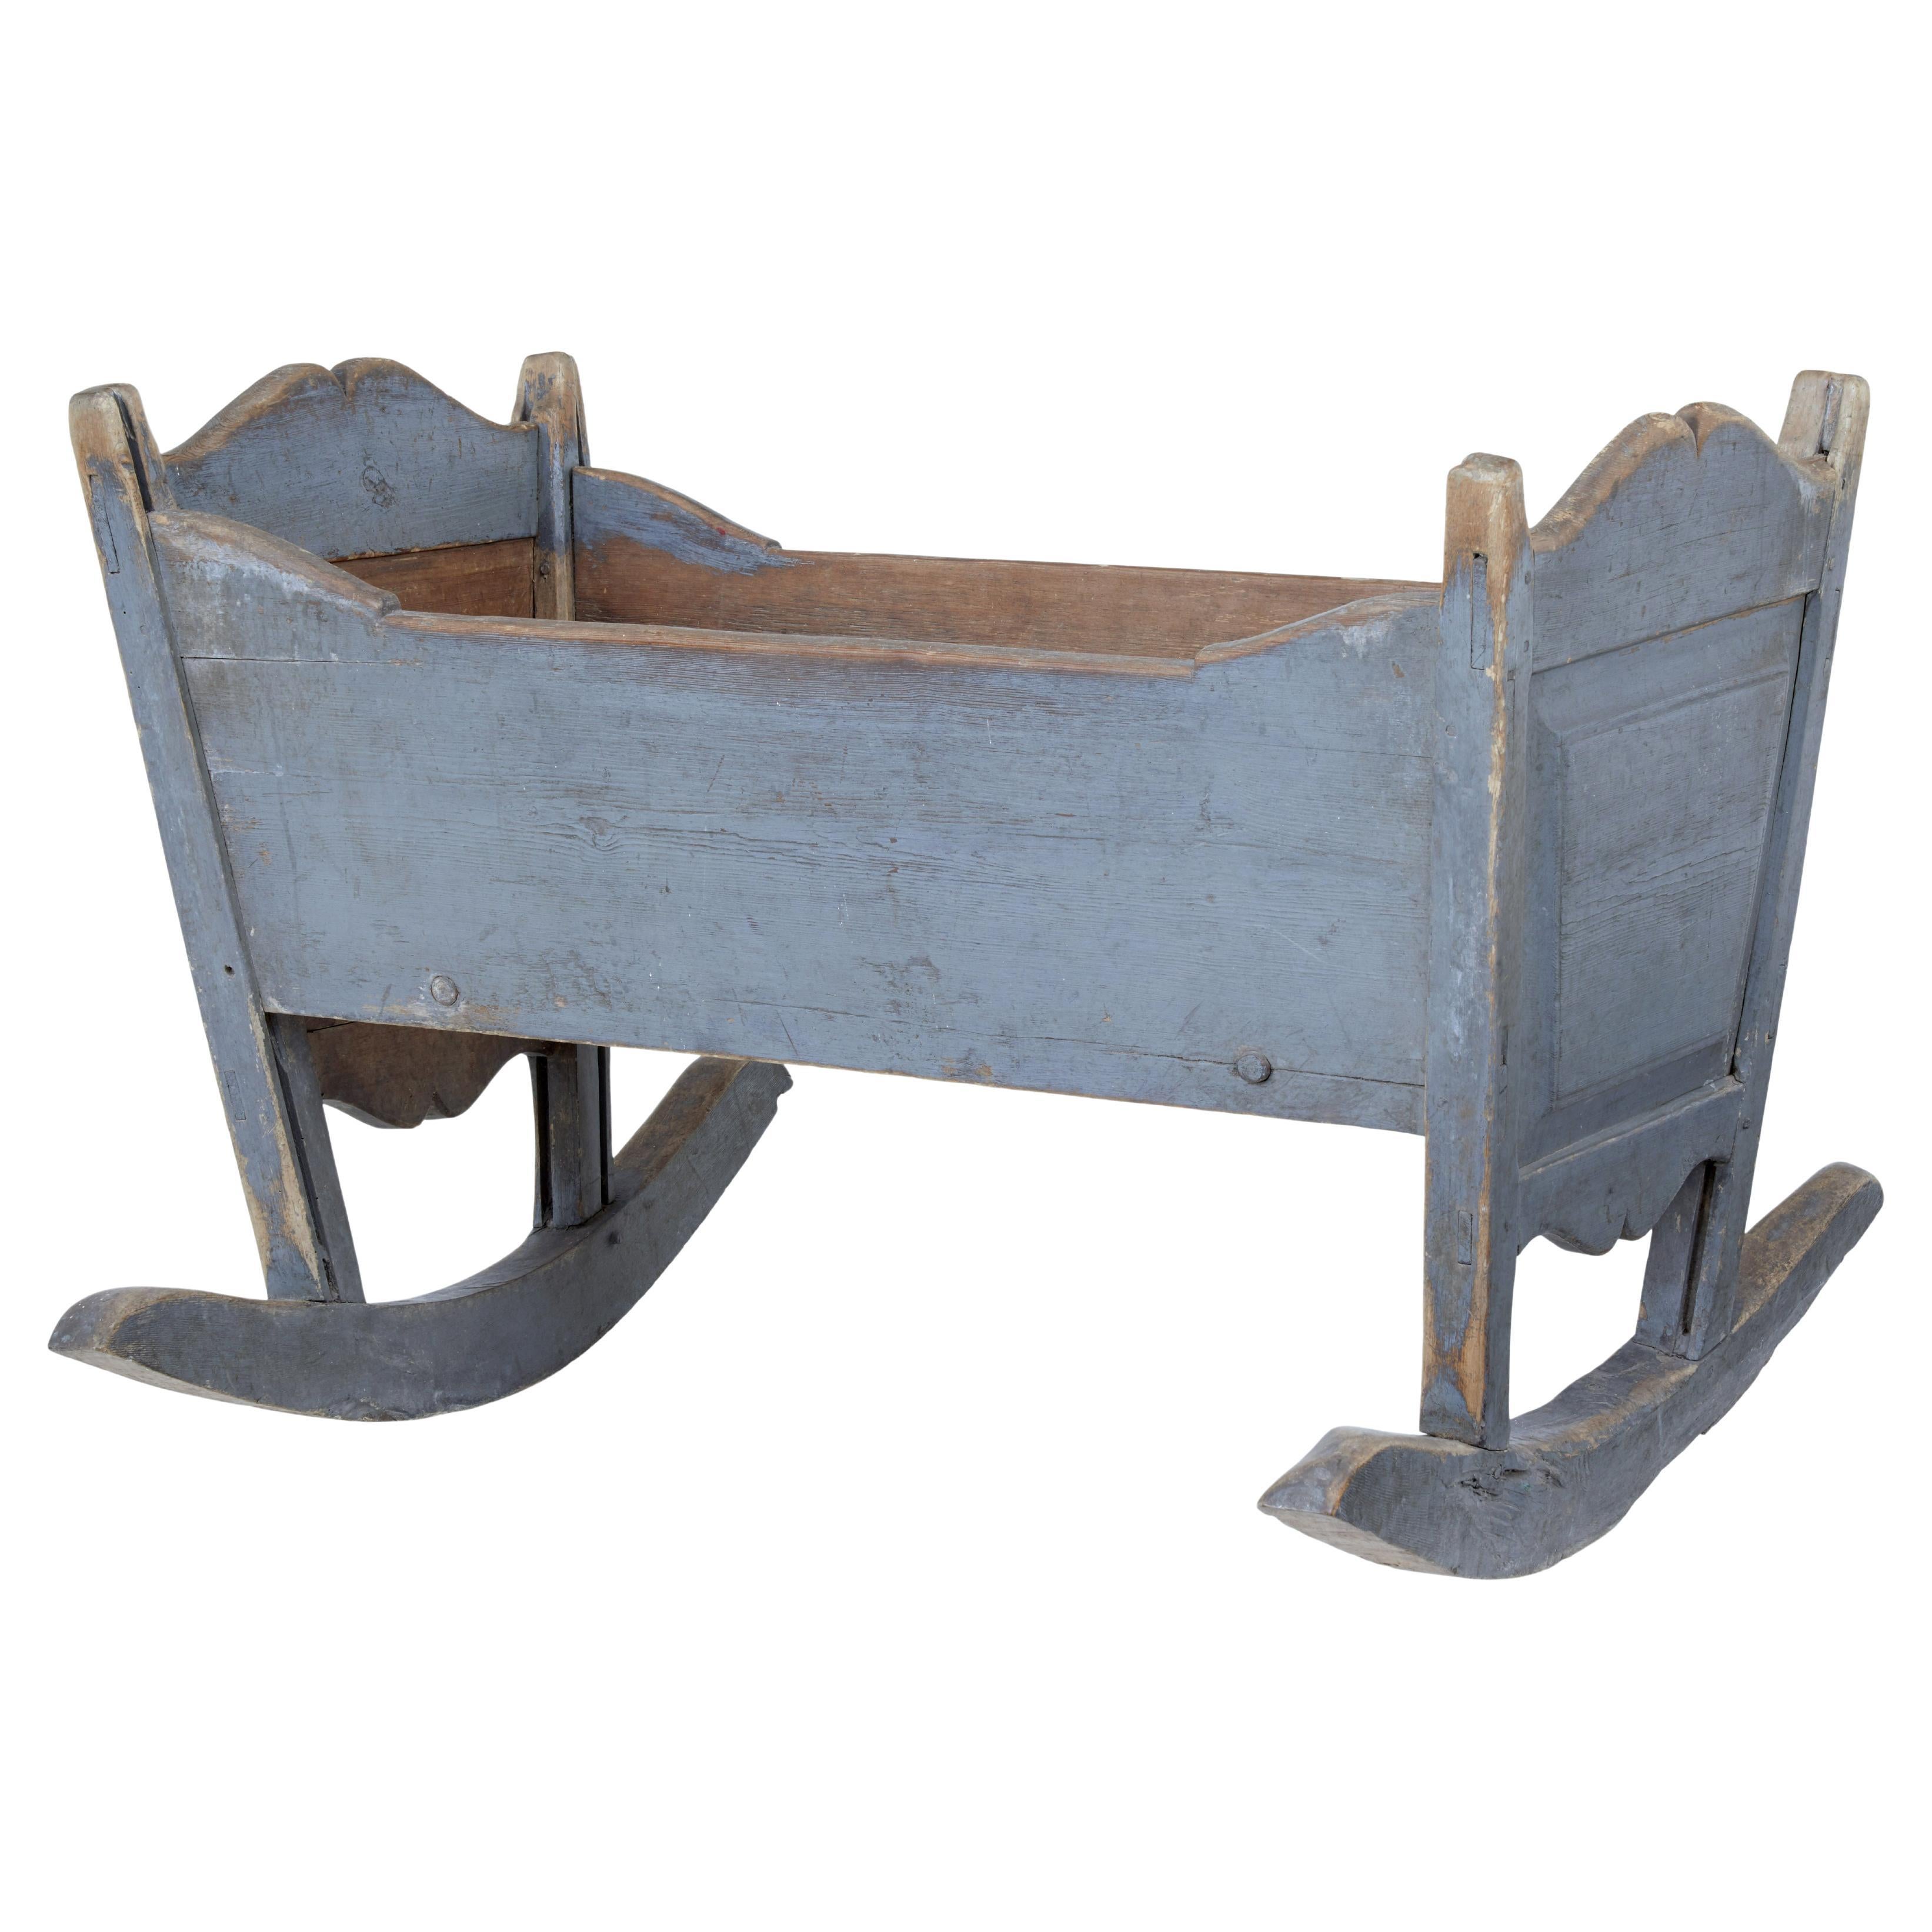 Mid 19th century Swedish painted pine rocking cradle For Sale